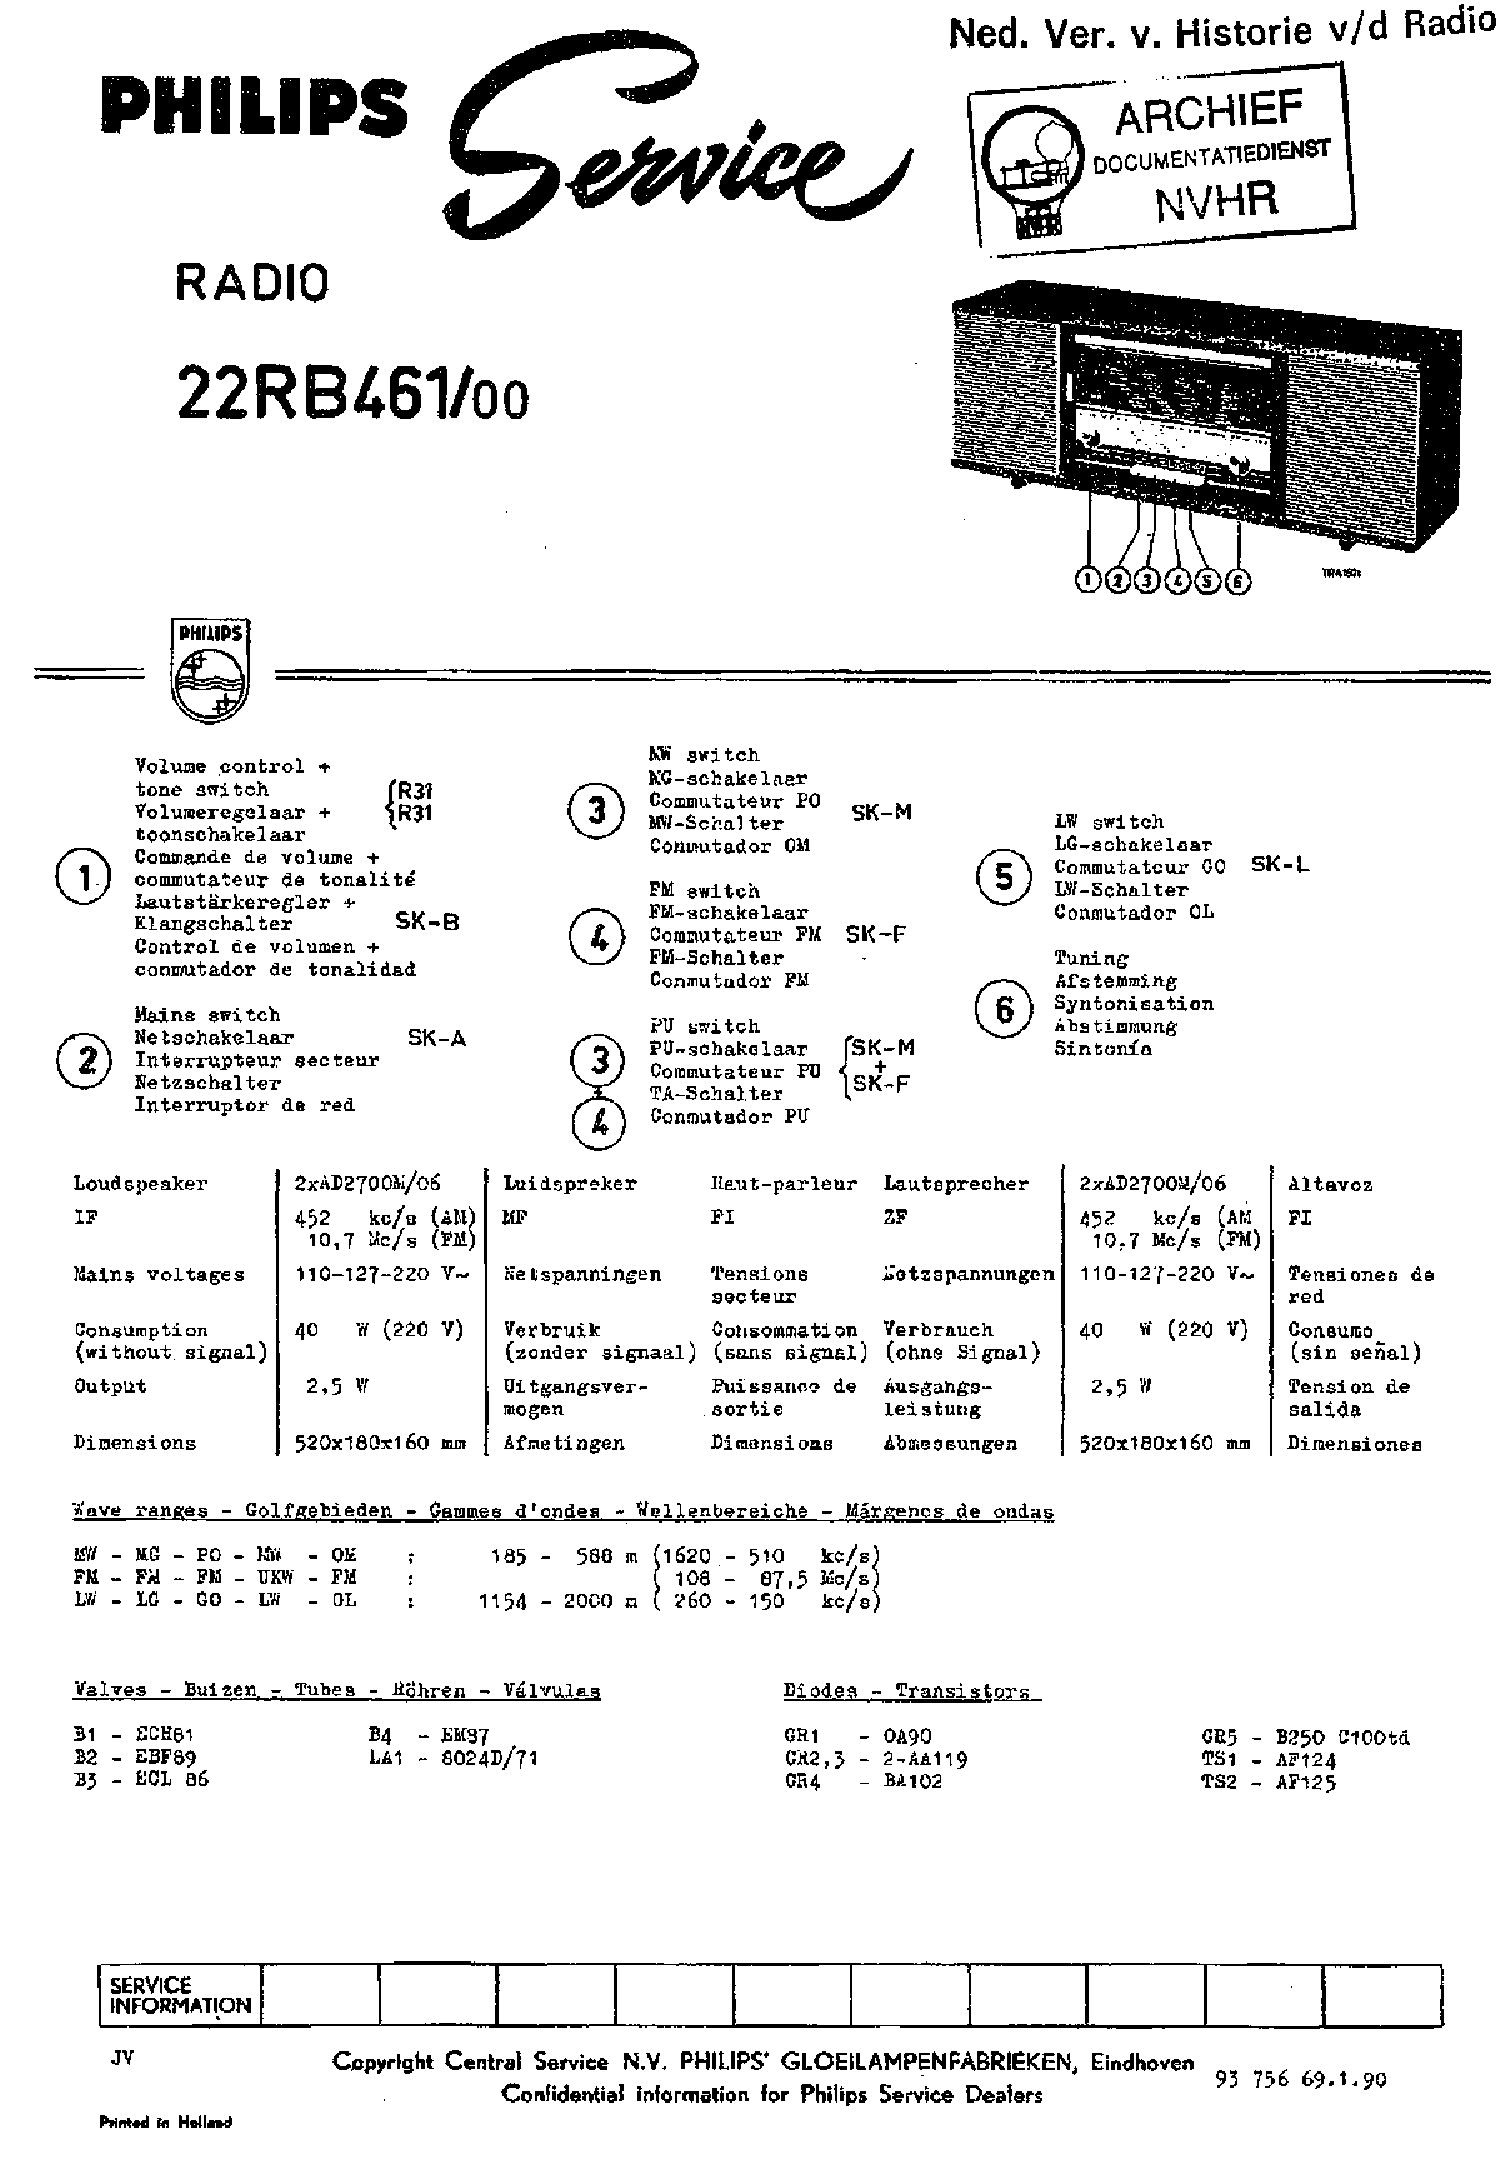 PHILIPS 22RB461-00 AM-FM RADIO SM service manual (1st page)